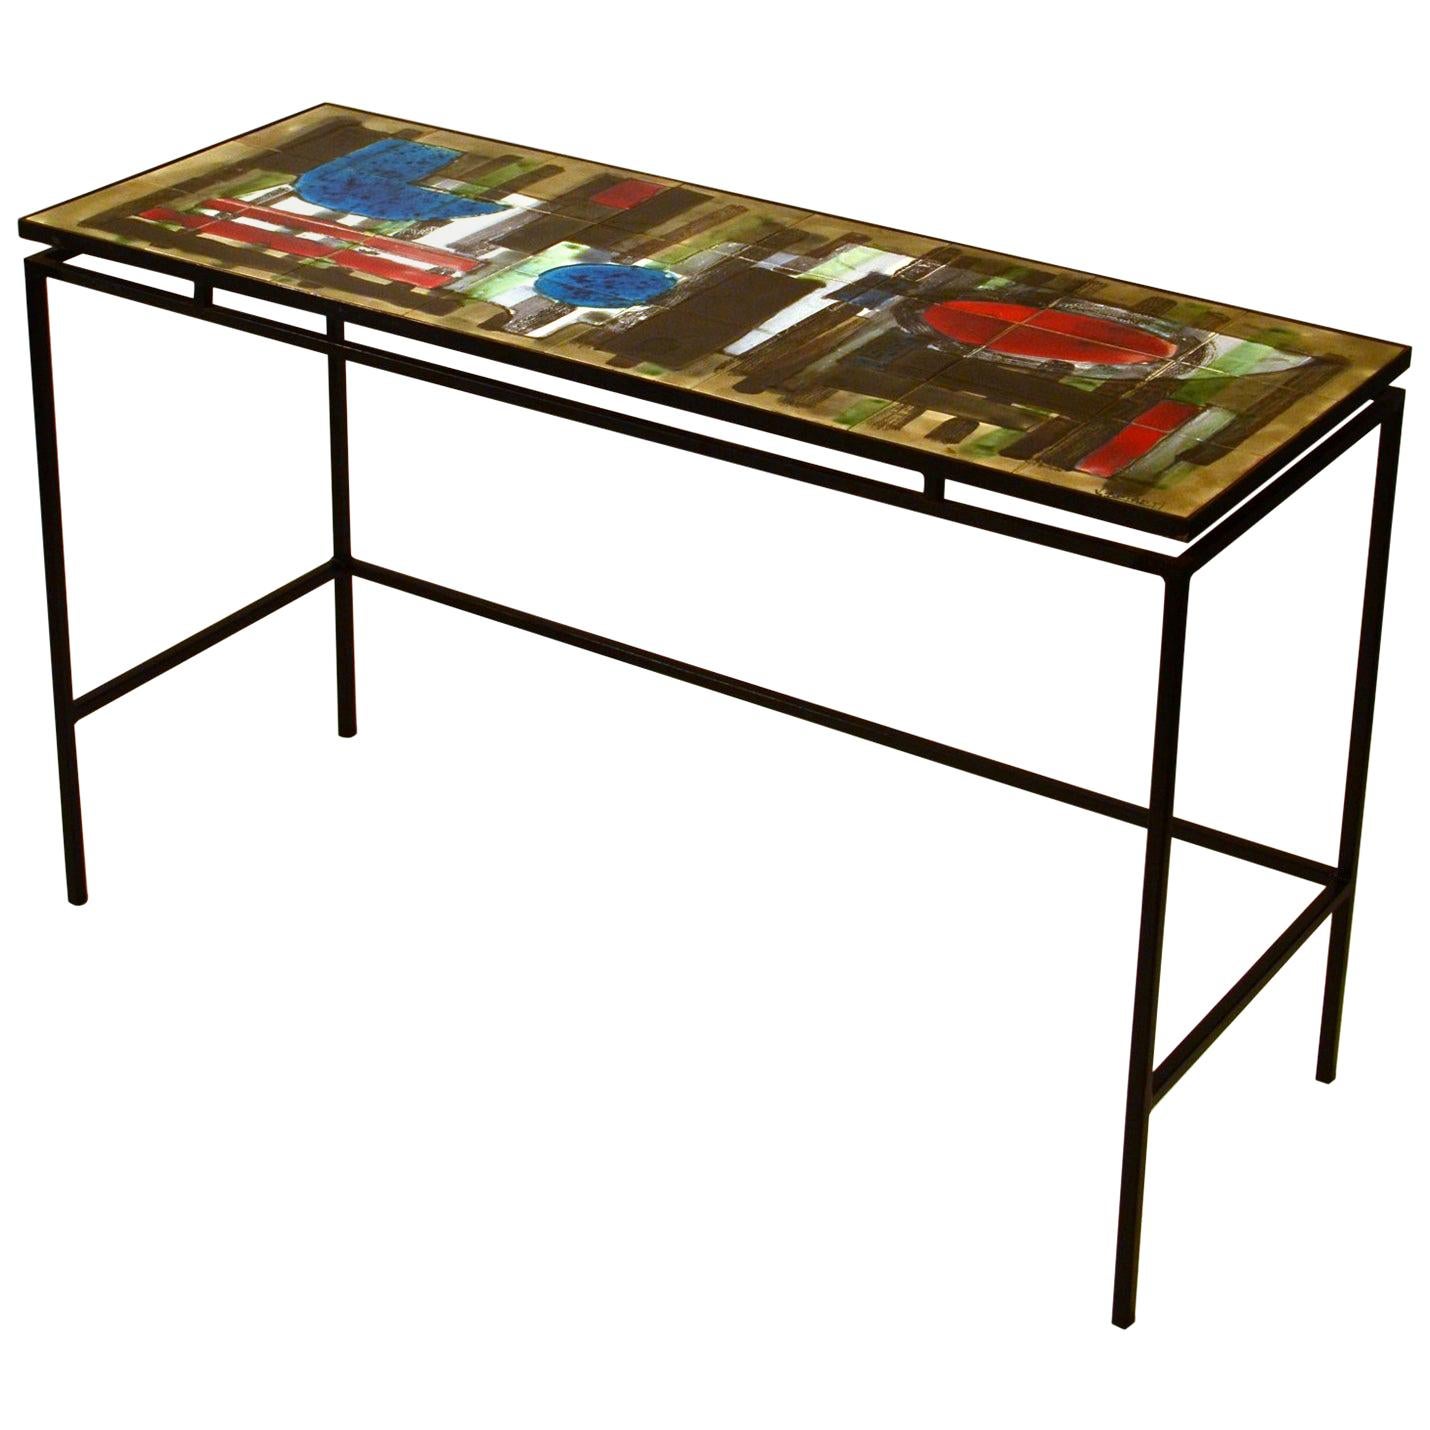 Console or Desk Ceramic Top on Metal Frame by Belarti